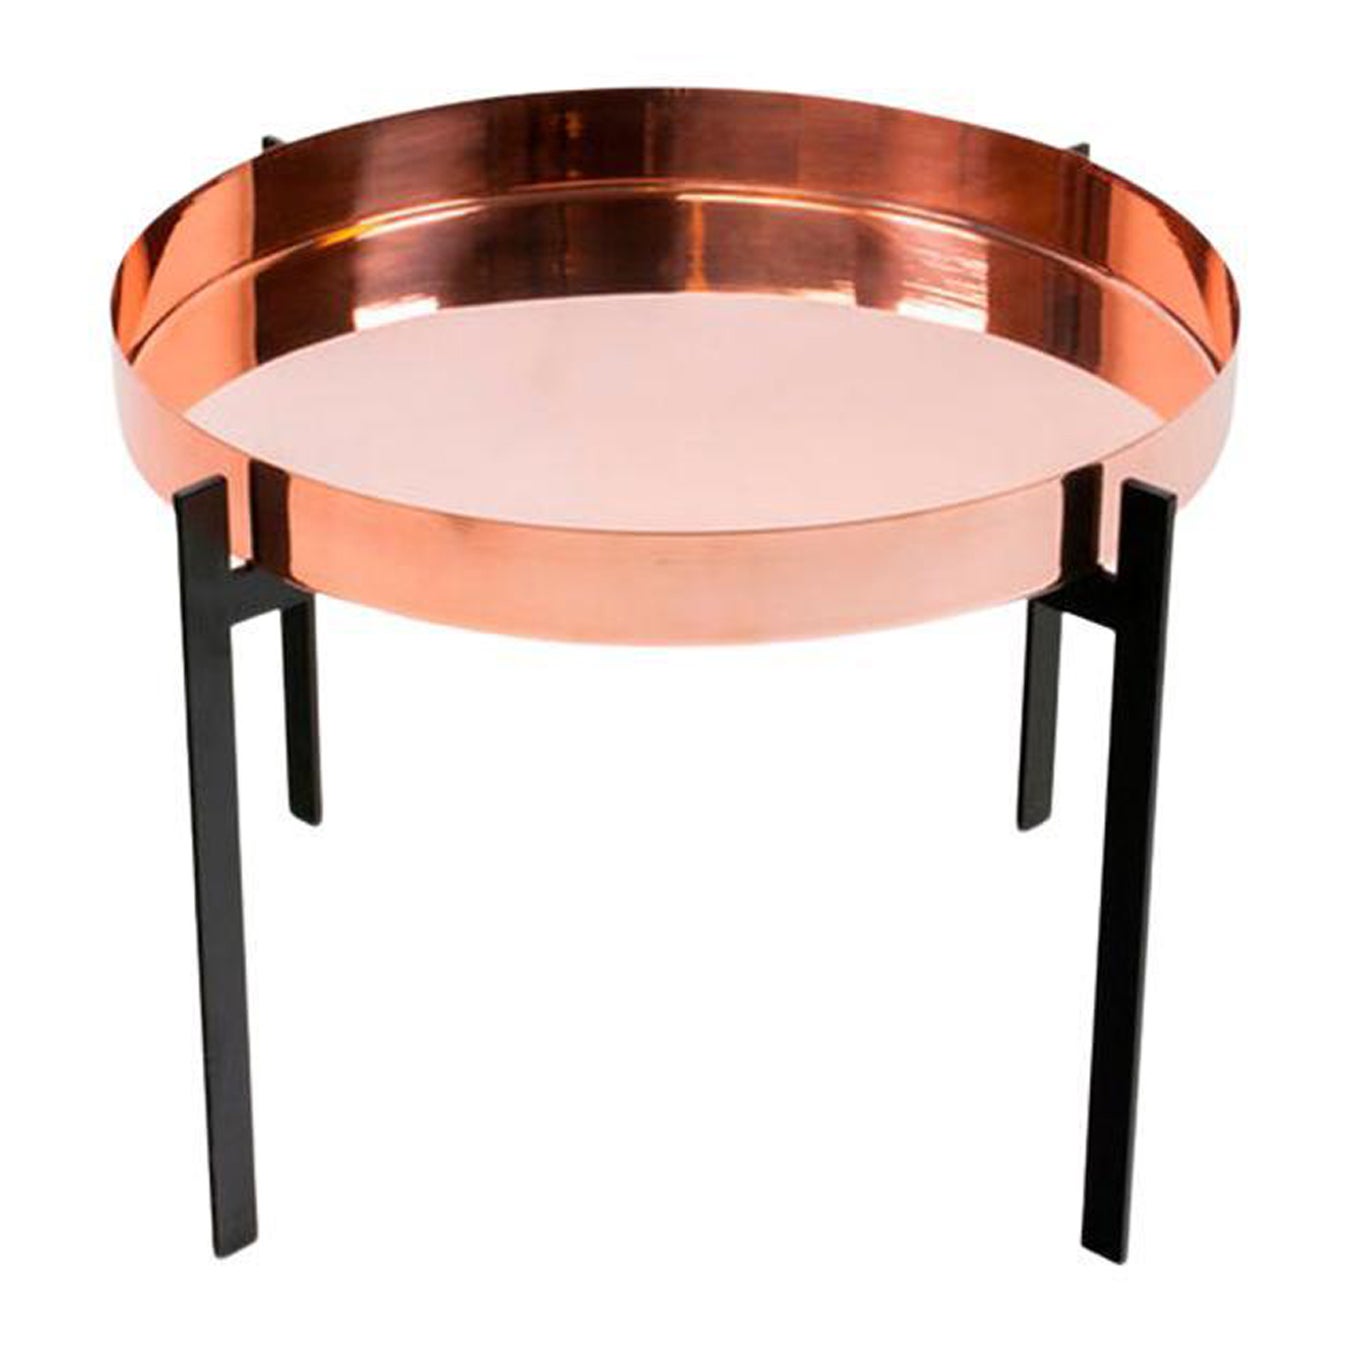 Copper Single Deck Table by Ox Denmarq